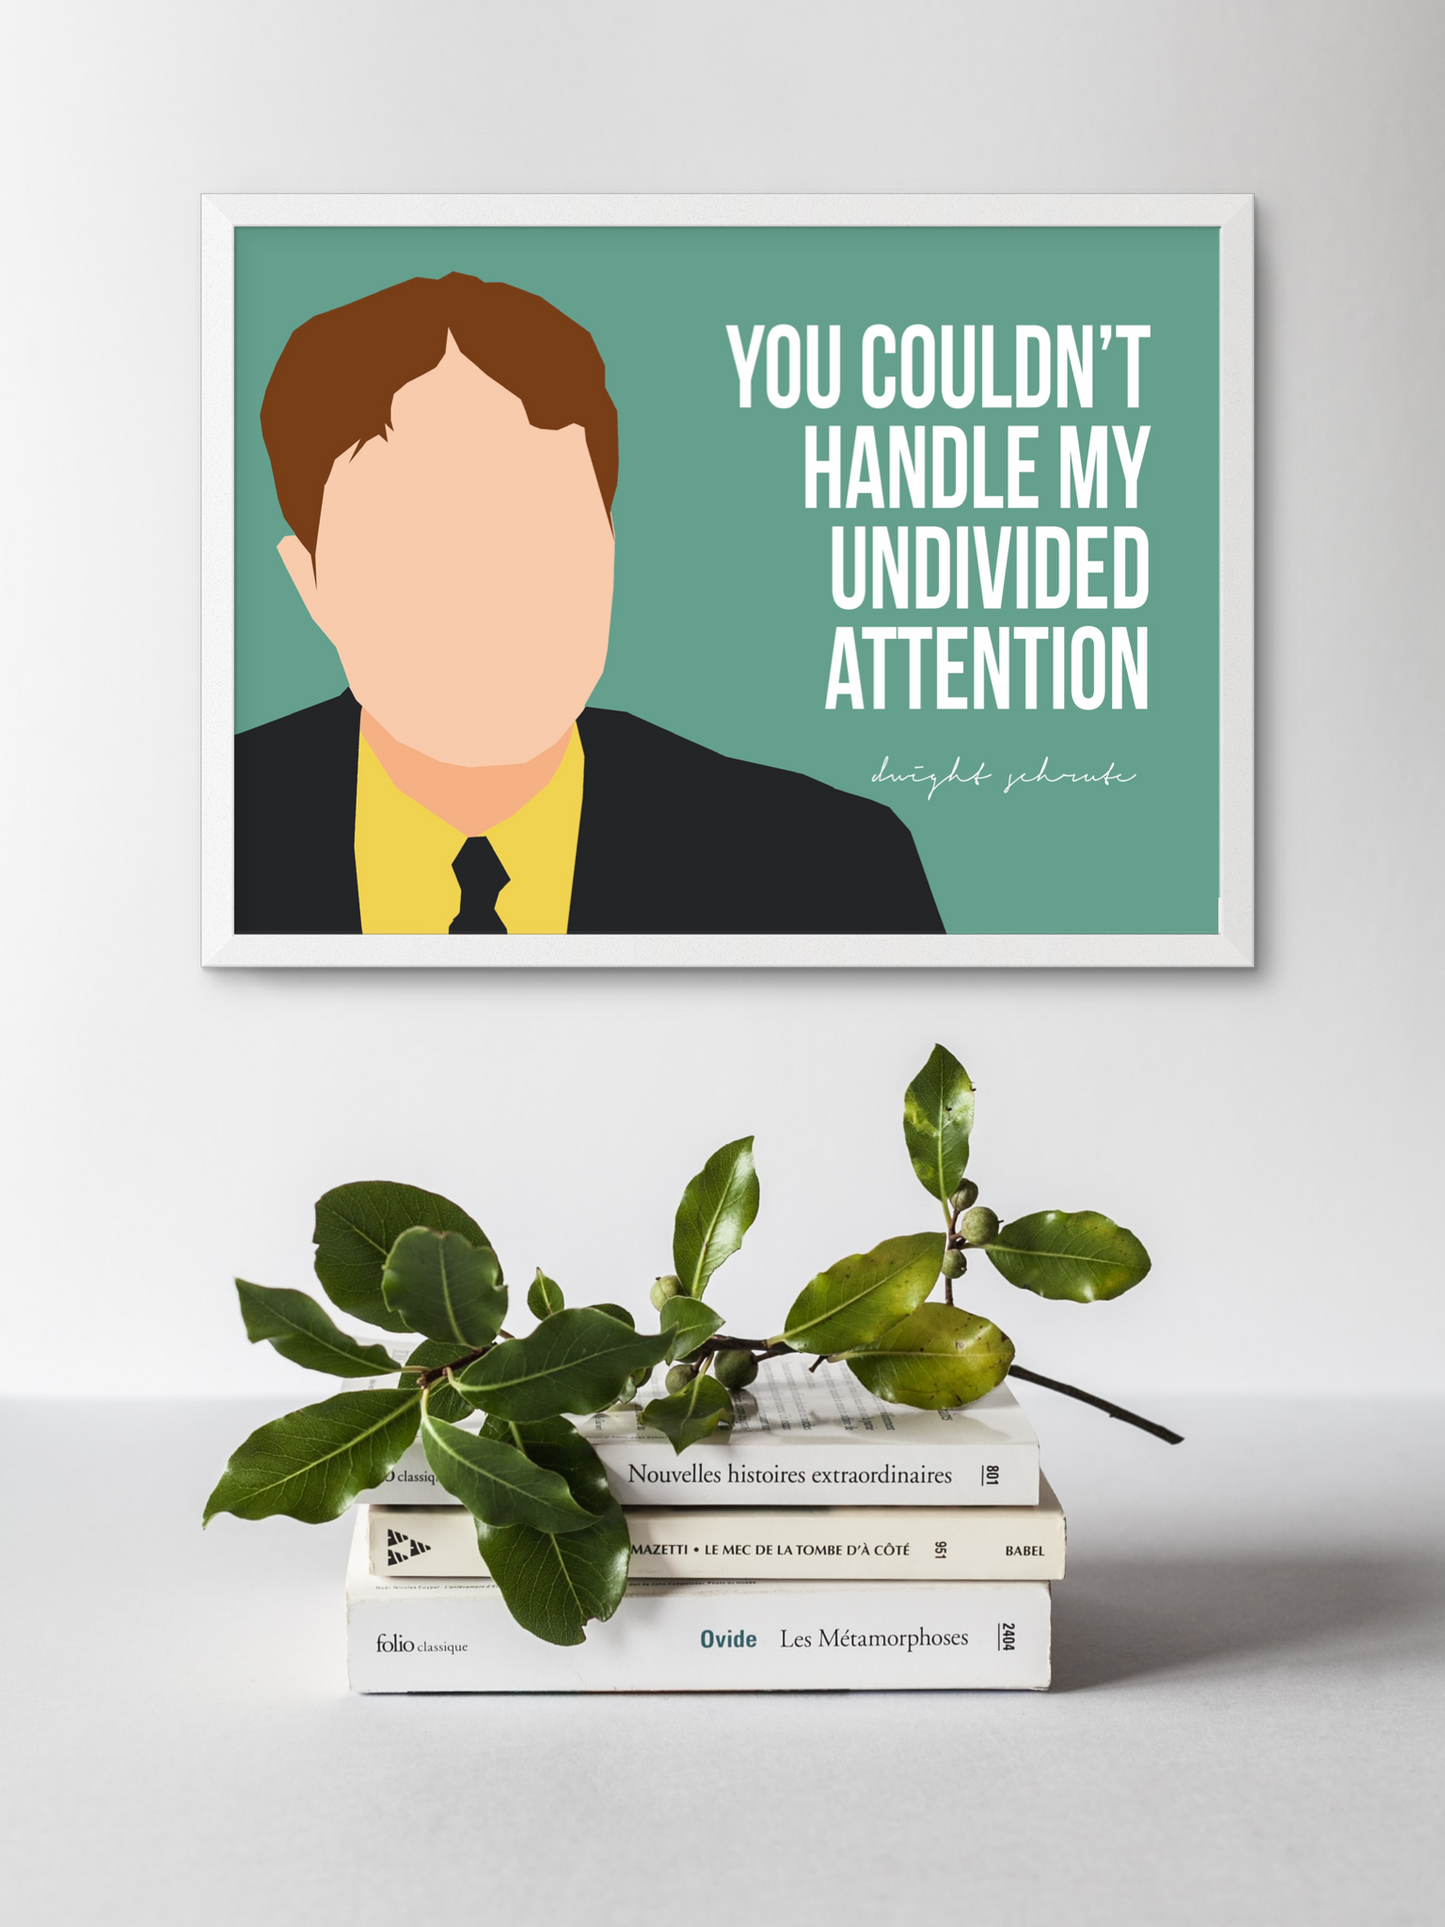 The Office Poster | Dwight Schrute - "You couldn’t handle my undivided attention"